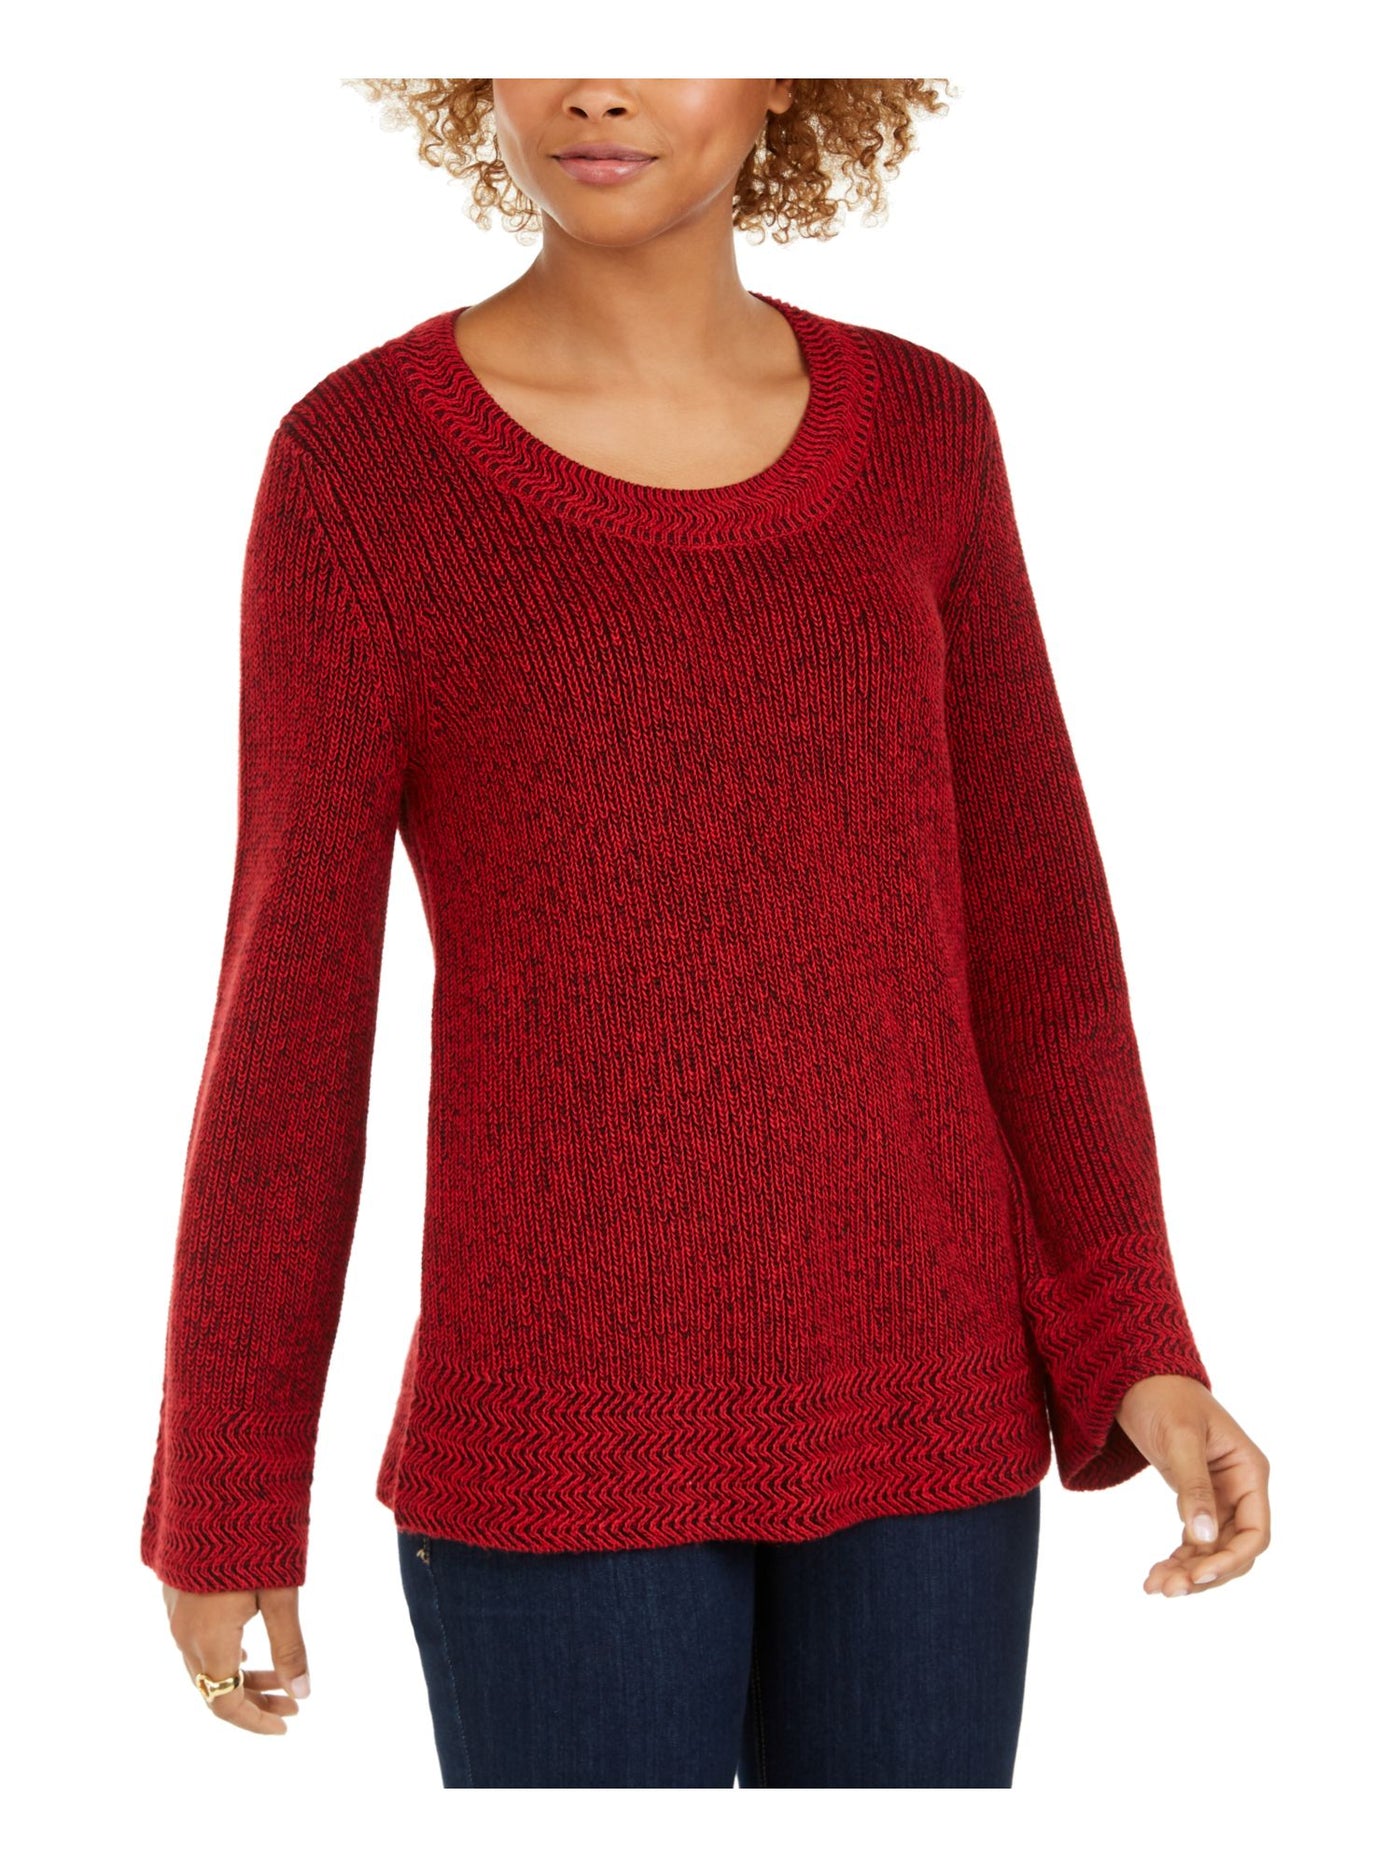 STYLE & COMPANY Womens Red Printed Long Sleeve Top Petites Size: PS